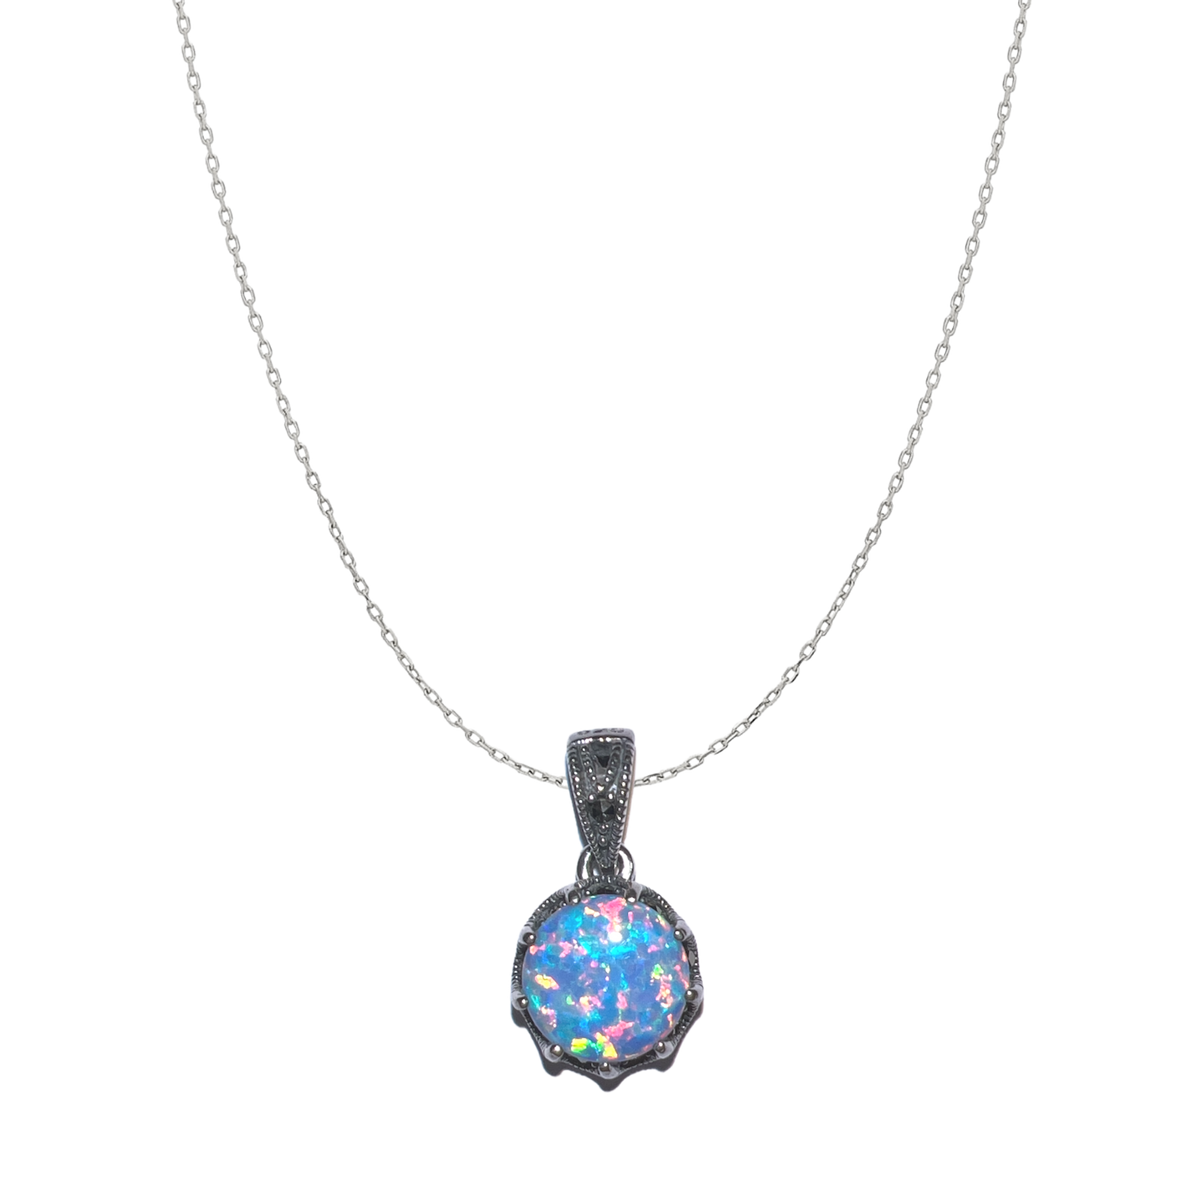 Circle Opal High Quality Sterling Silver Pendant Necklace